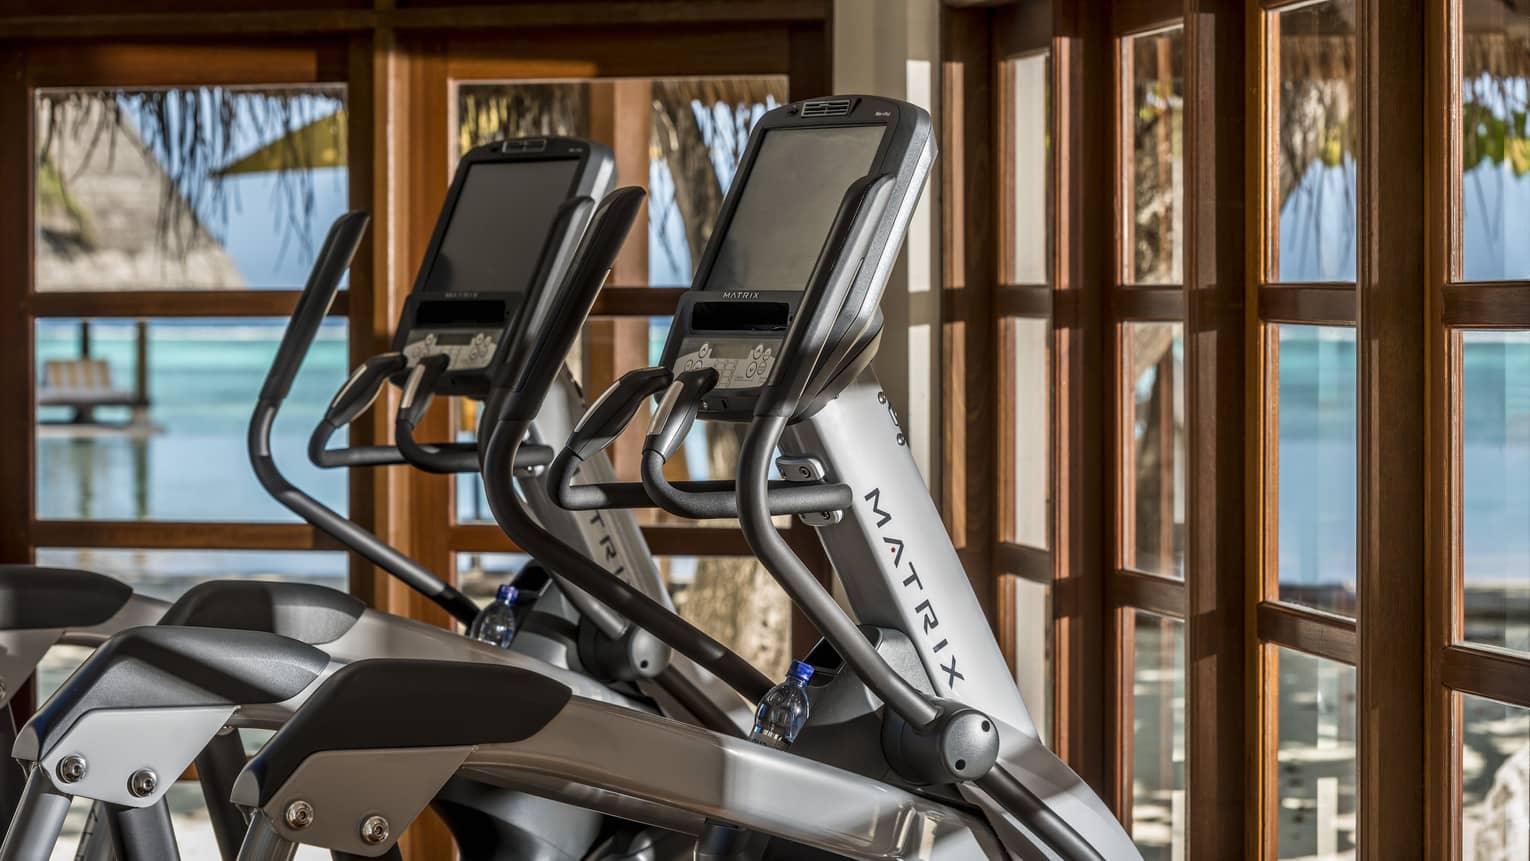 Matrix elliptical machines looking out on the ocean from the fitness centre